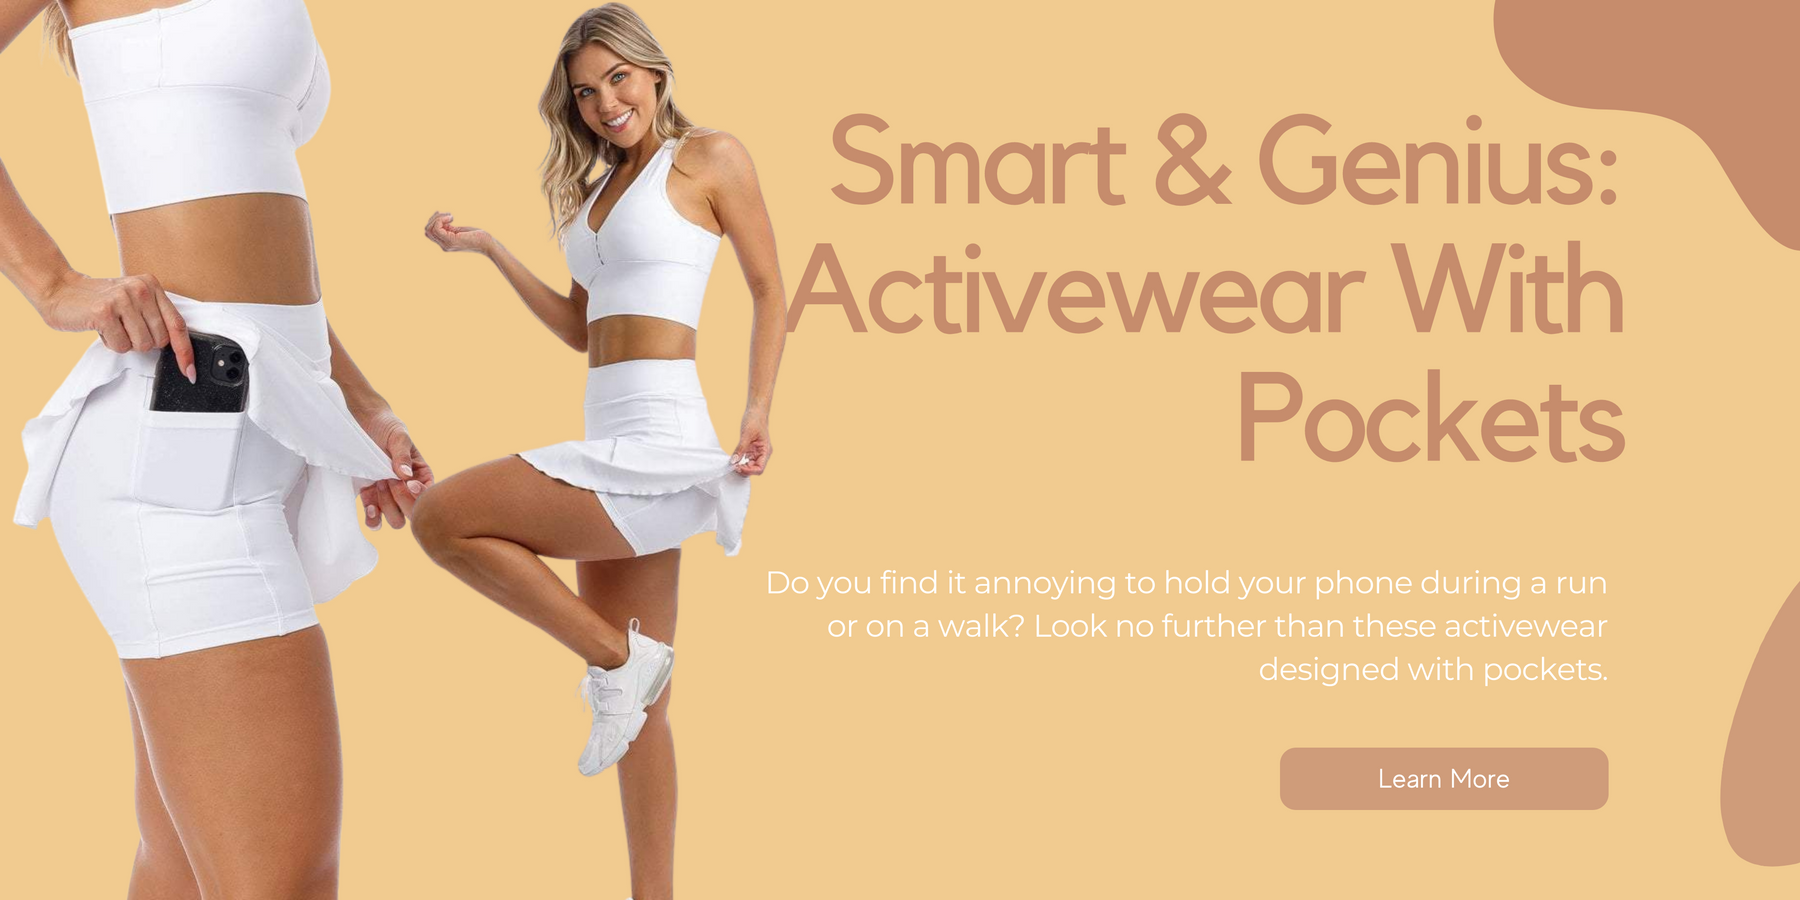 Smart and Genius: Activewear With Pockets